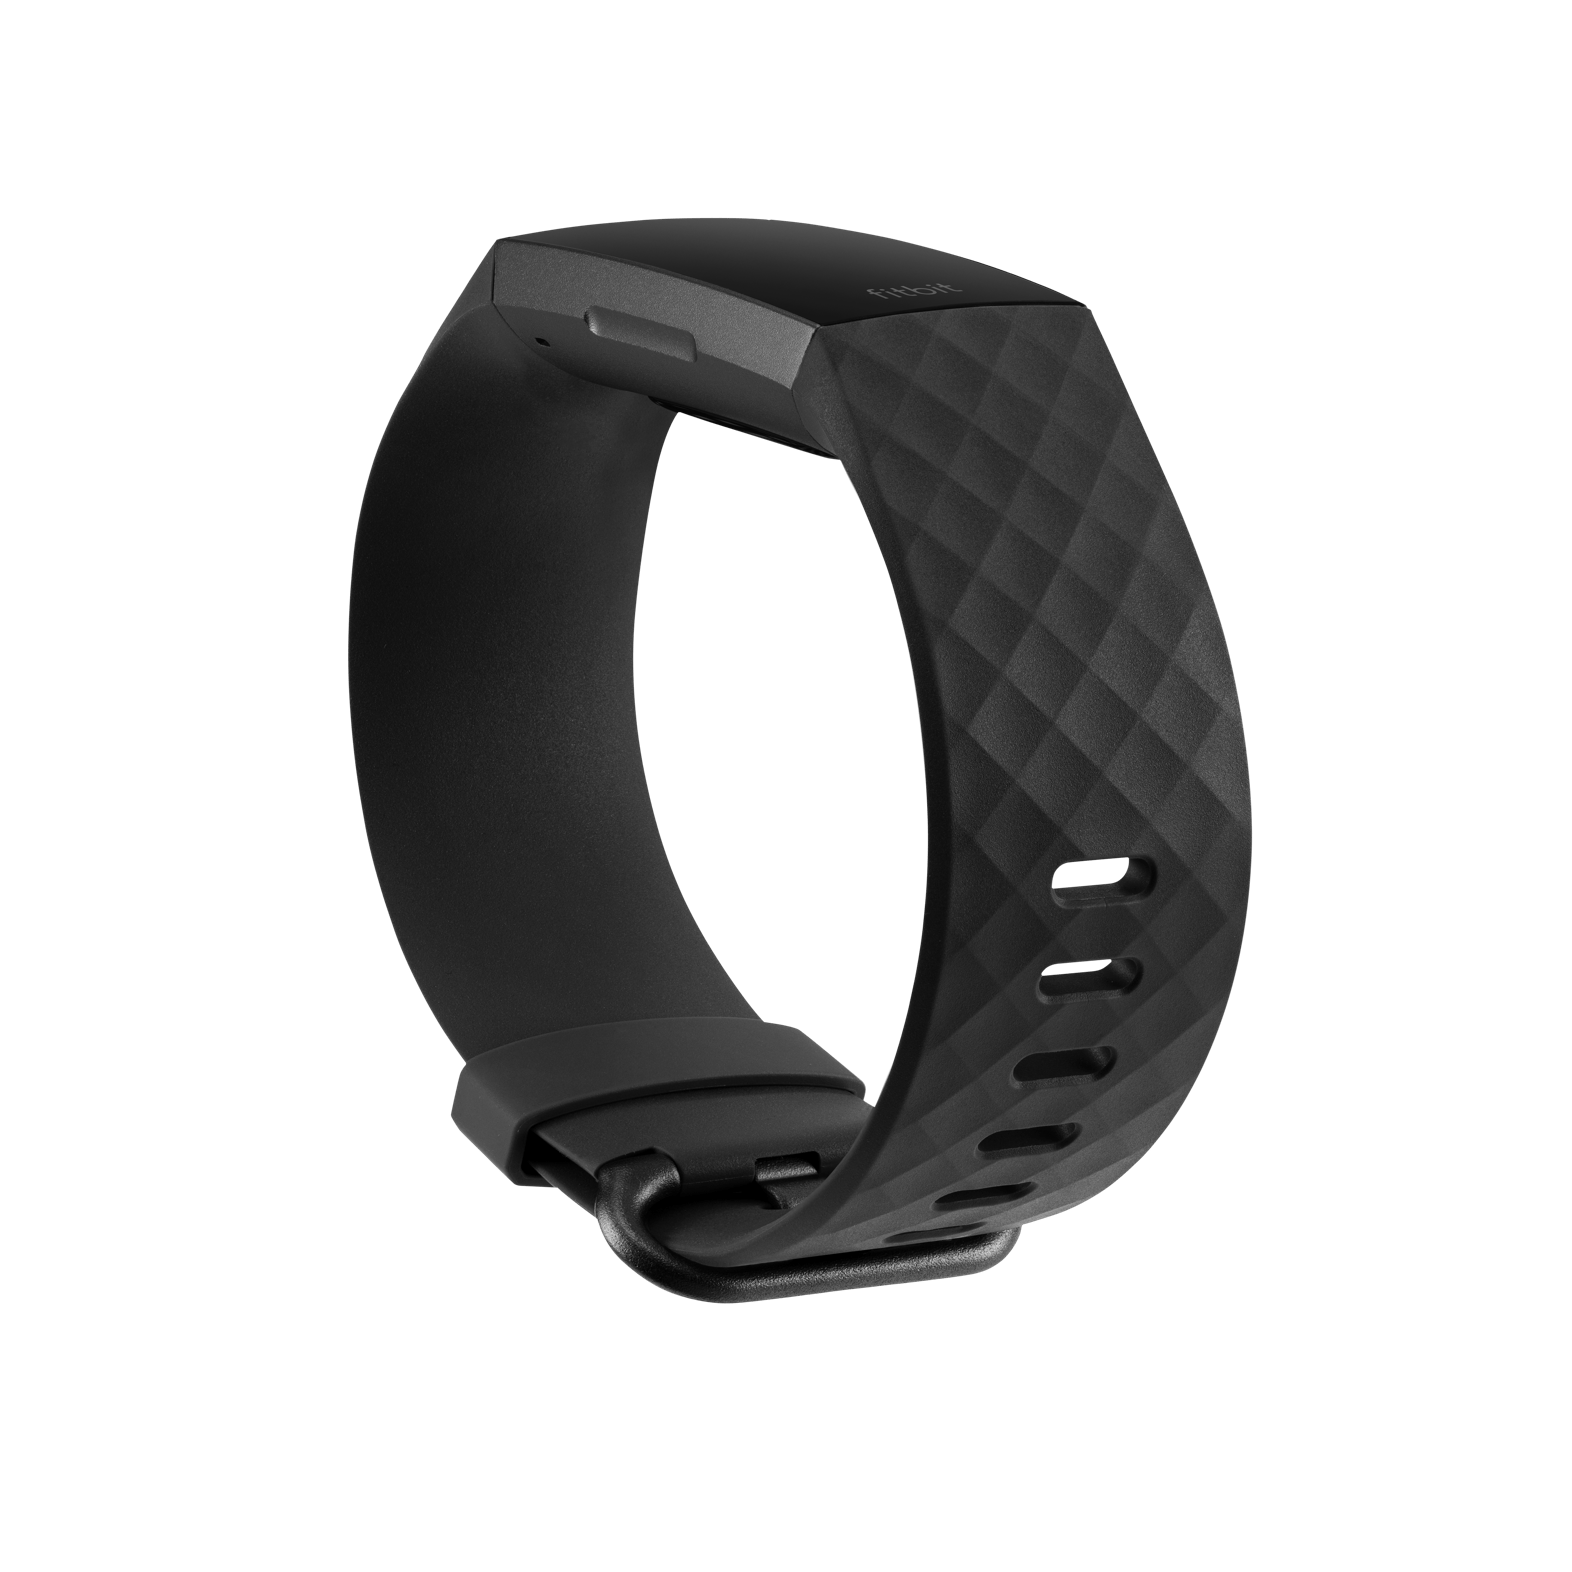 Brand New in original Packaging FitBit Charge 3 Sport Band Black Size Large 